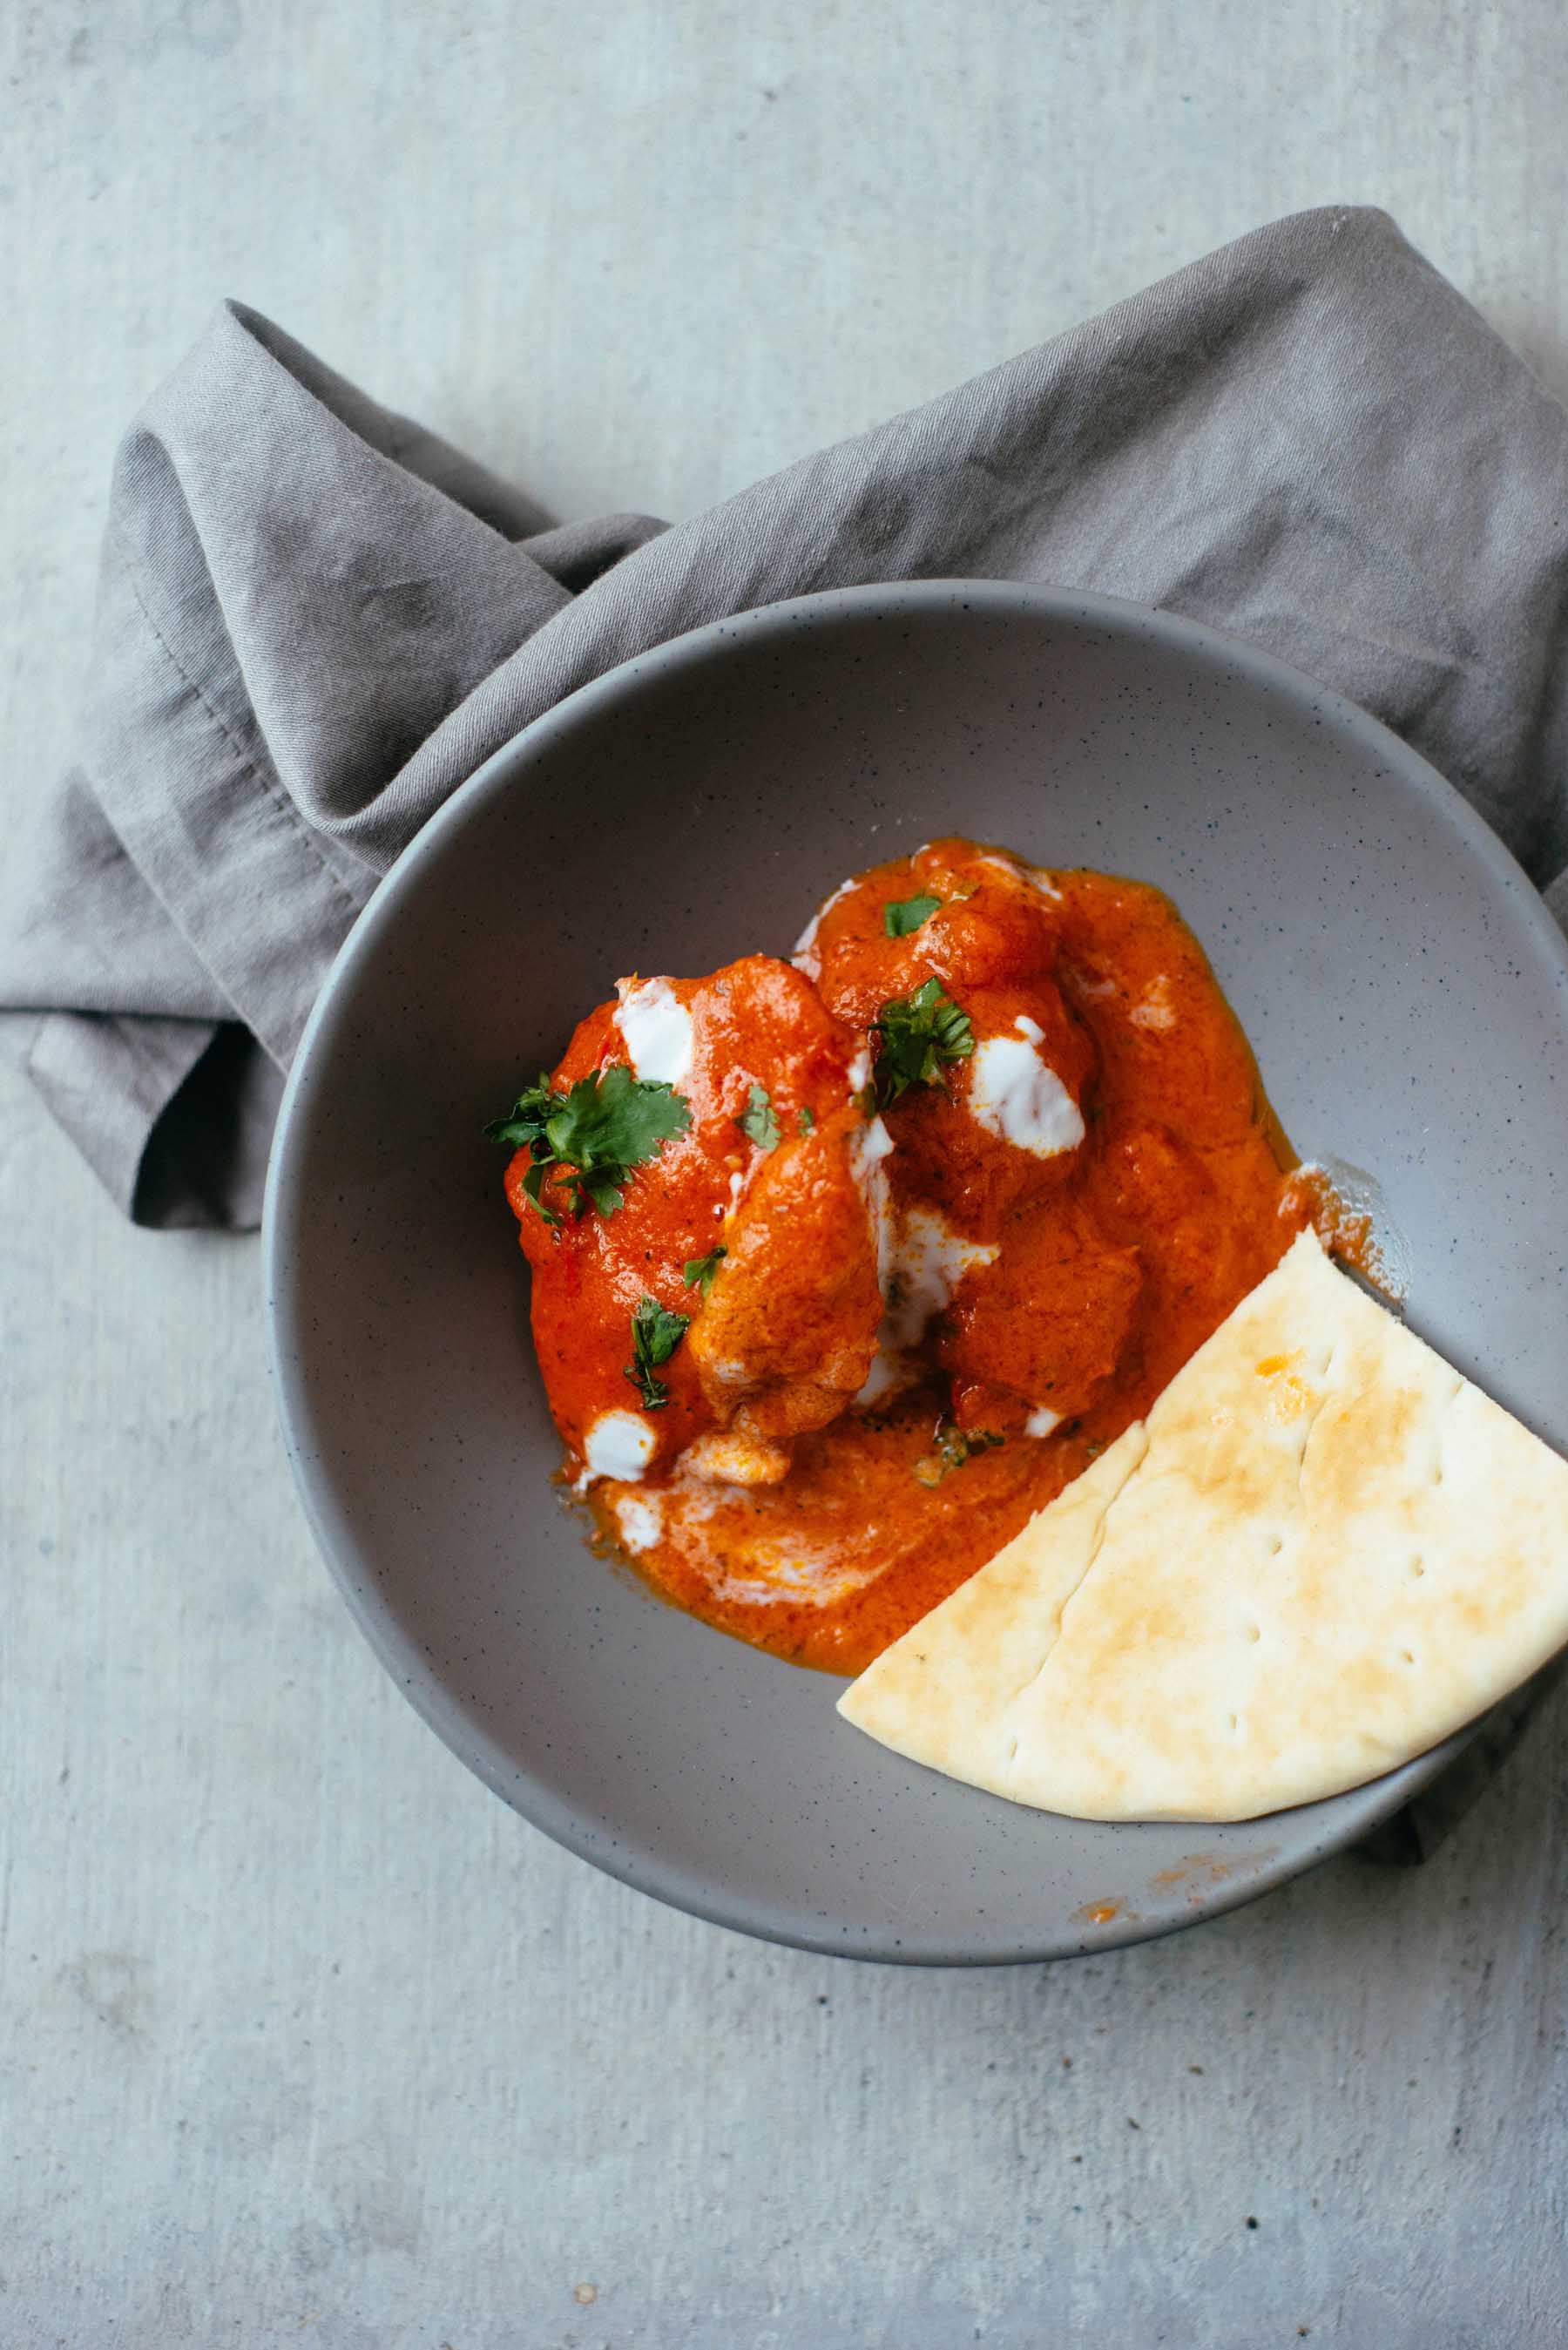 Serve the butter chicken with naan or Indian flat bread.